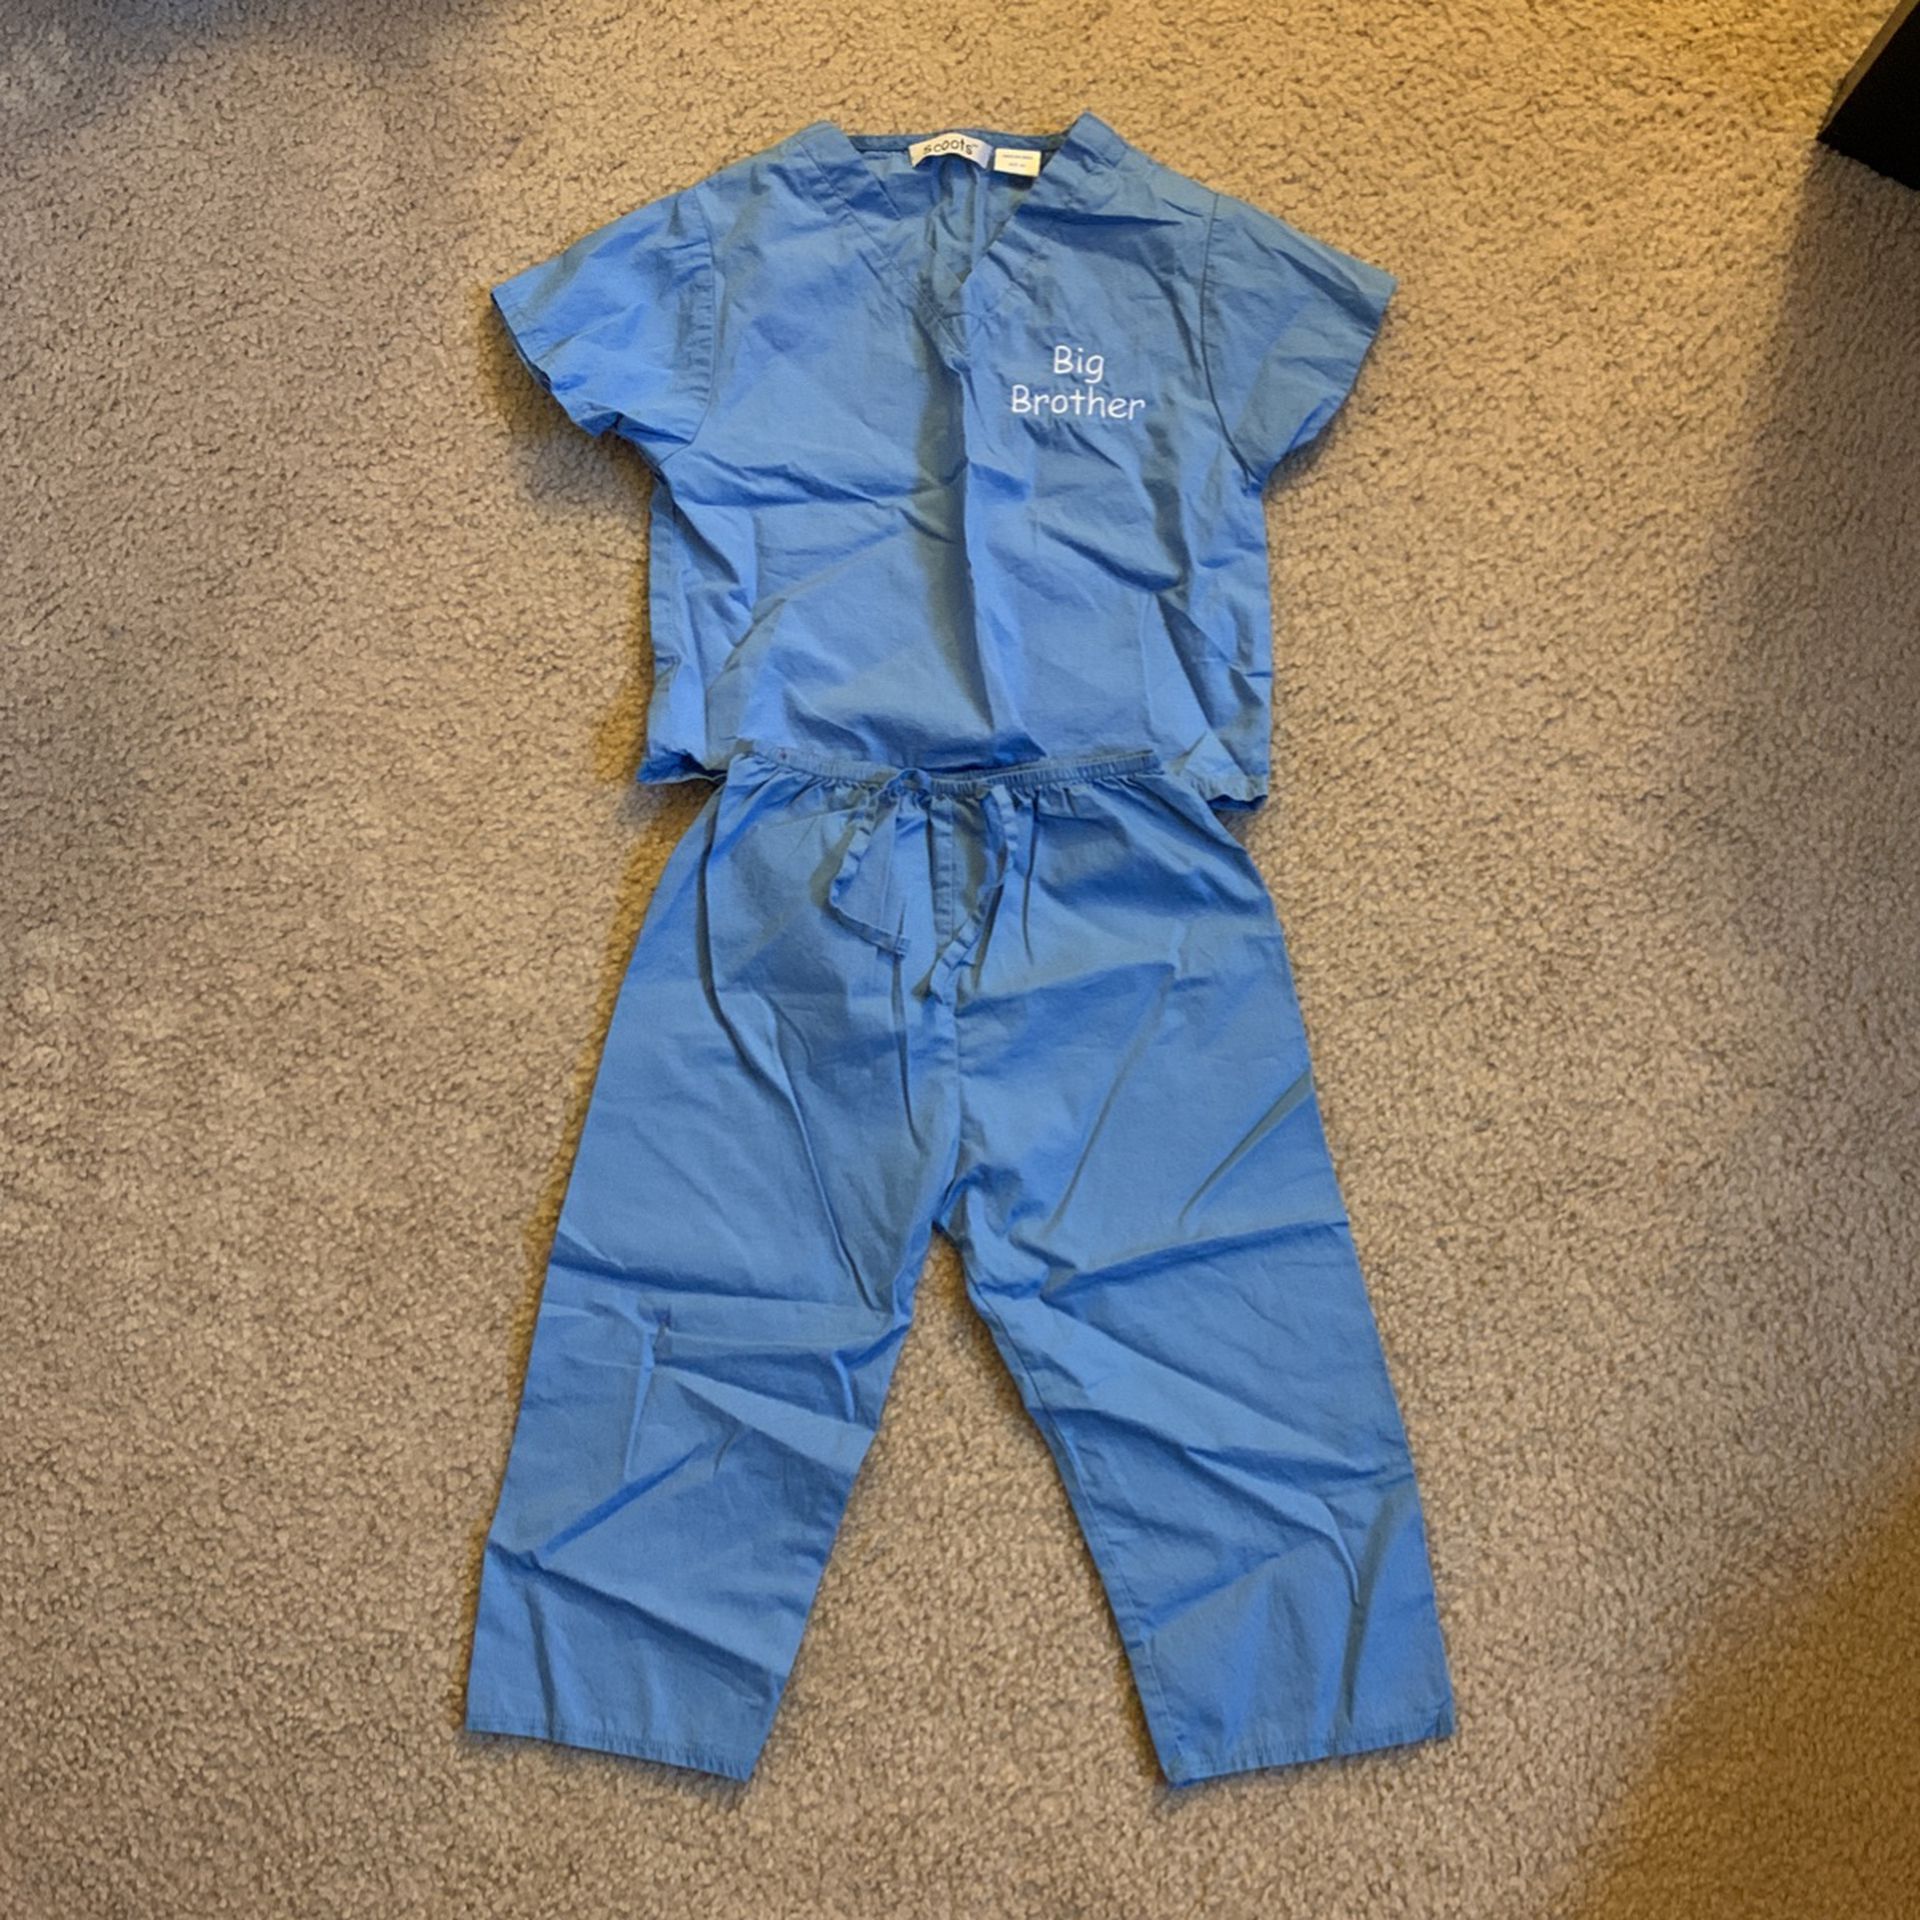 Size 4T Big Brother Scrubs 